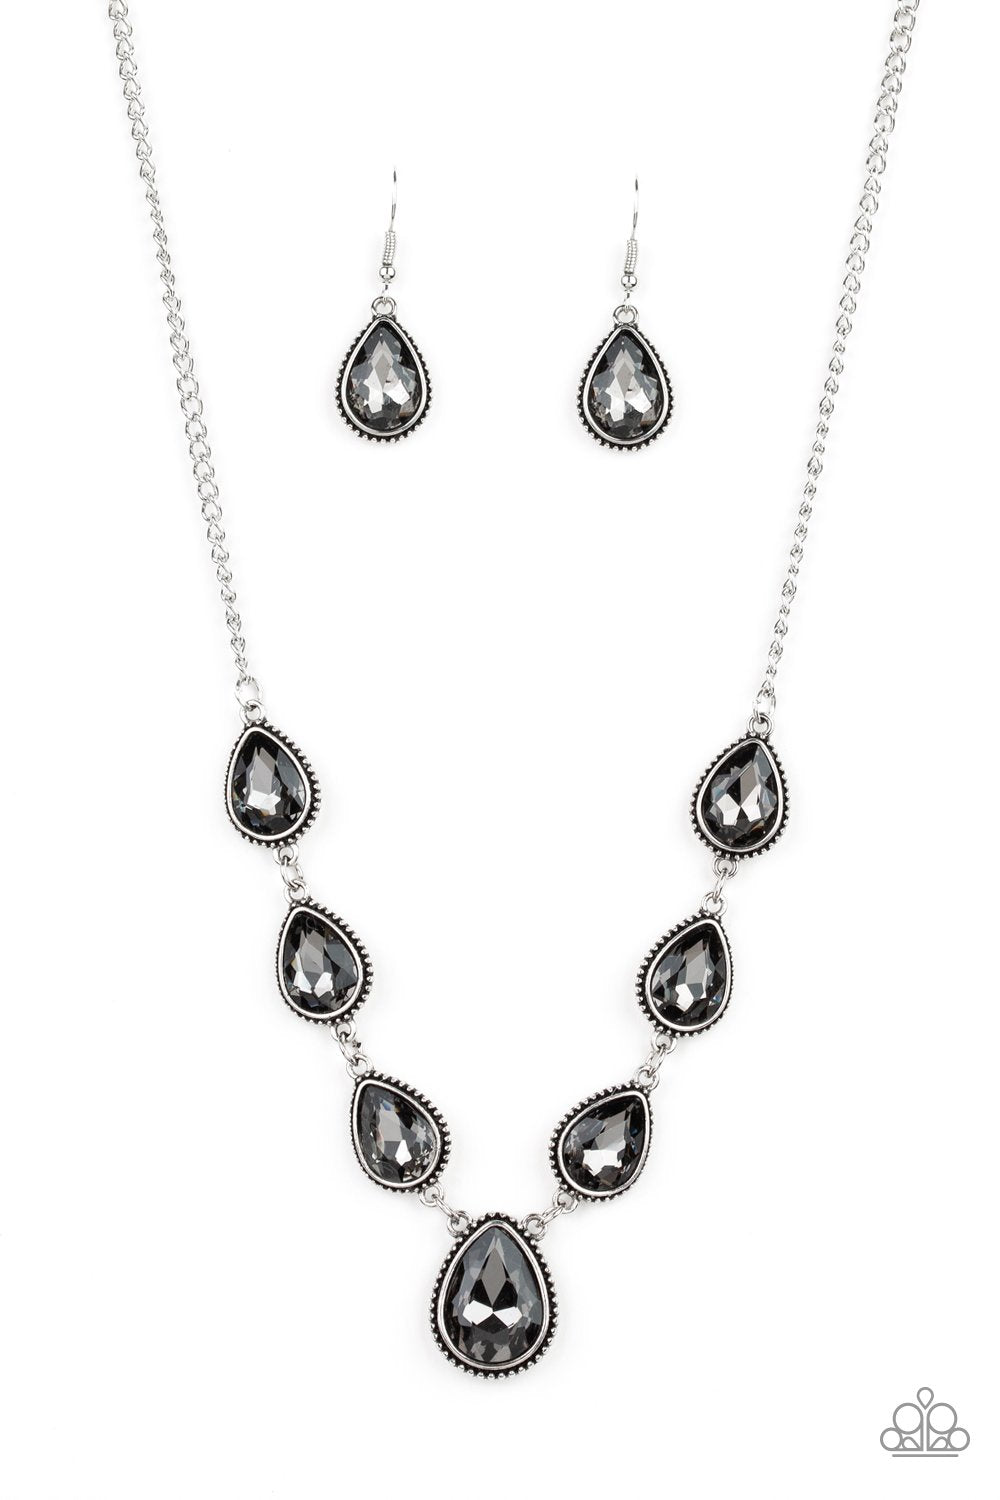 Socialite Social Silver and Smoky Teardrop Gem Necklace - Paparazzi Accessories-CarasShop.com - $5 Jewelry by Cara Jewels